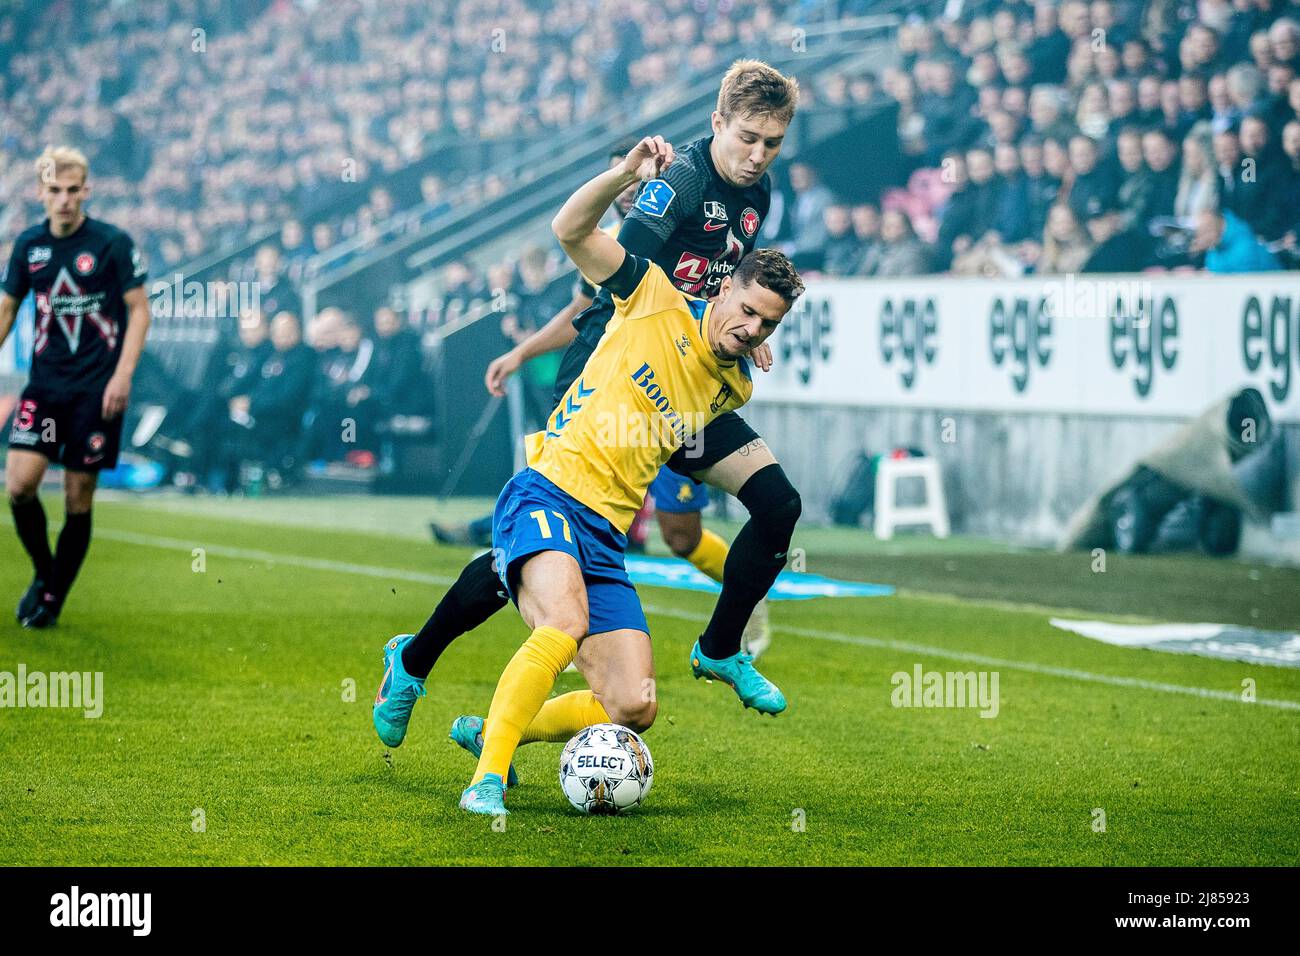 Herning, Denmark. 12th May, 2022. Andreas Bruus (17) of Broendby IF and Charles (35) of FC Midtjylland seen during the 3F Superliga match between FC Midtjylland and Broendby IF at MCH Arena in Herning. (Photo Credit: Gonzales Photo/Alamy Live News Stock Photo